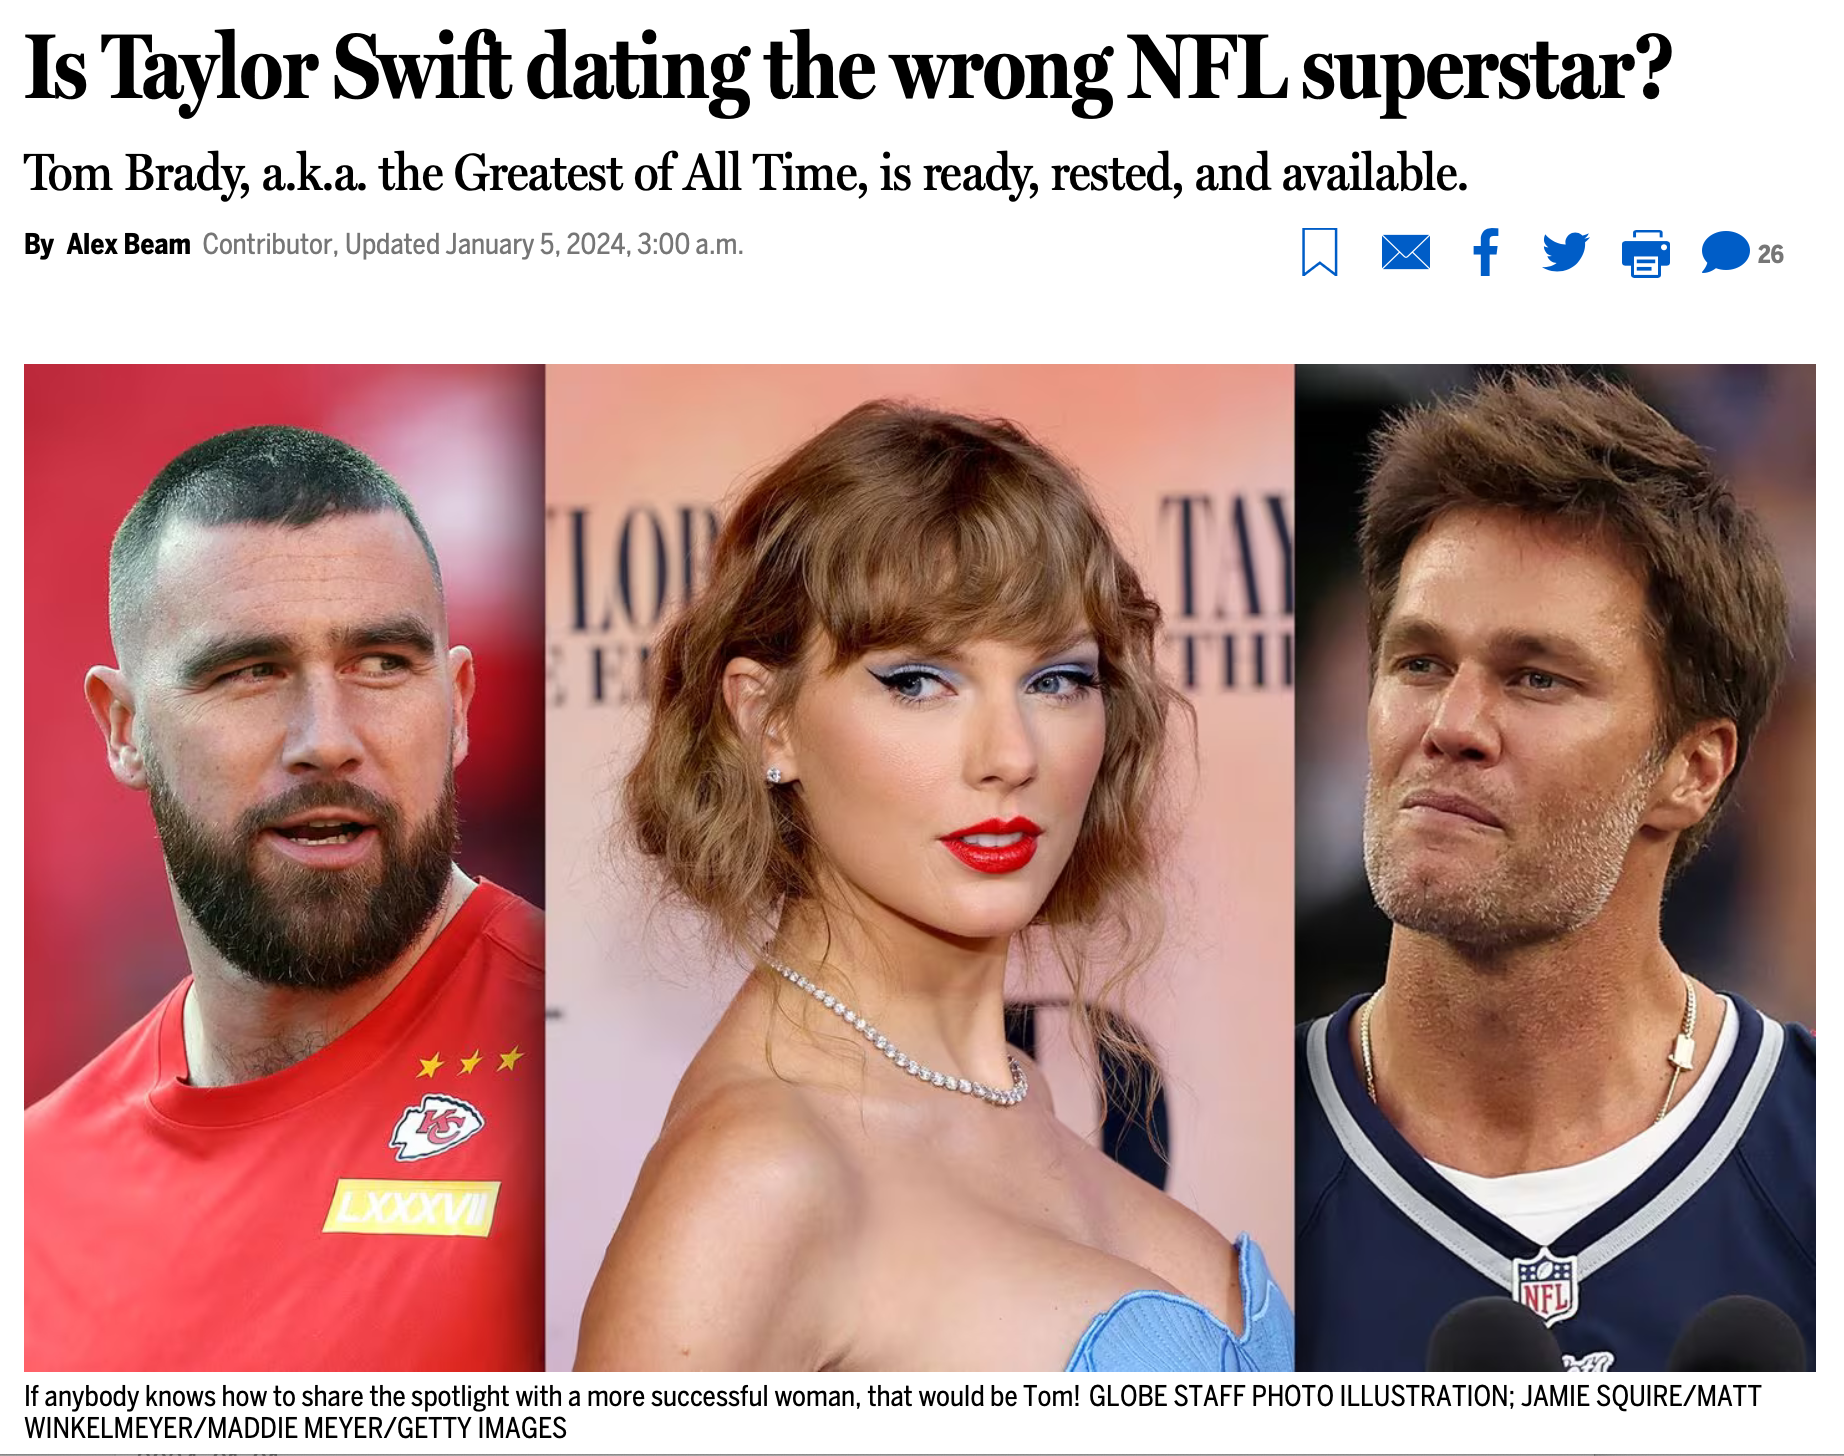 Screenshot of a news article with headline “Is Taylor Swift dating the wrong NFL superstar?” showing a Taylor Swift photo between a photo of Travis Kelce and Tom Brady.